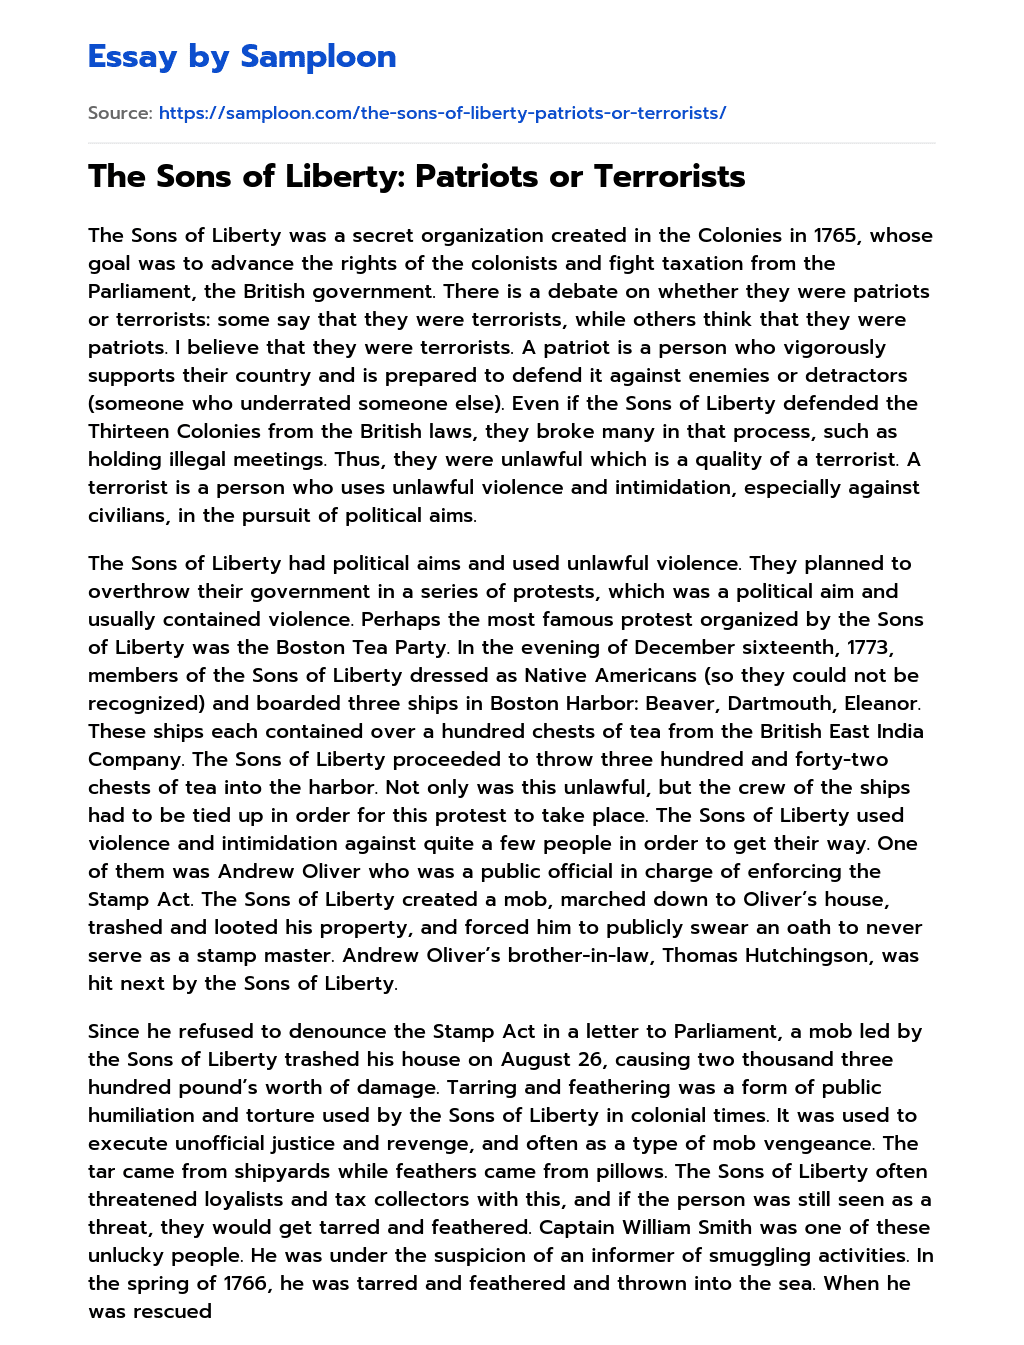 The Sons of Liberty: Patriots or Terrorists essay